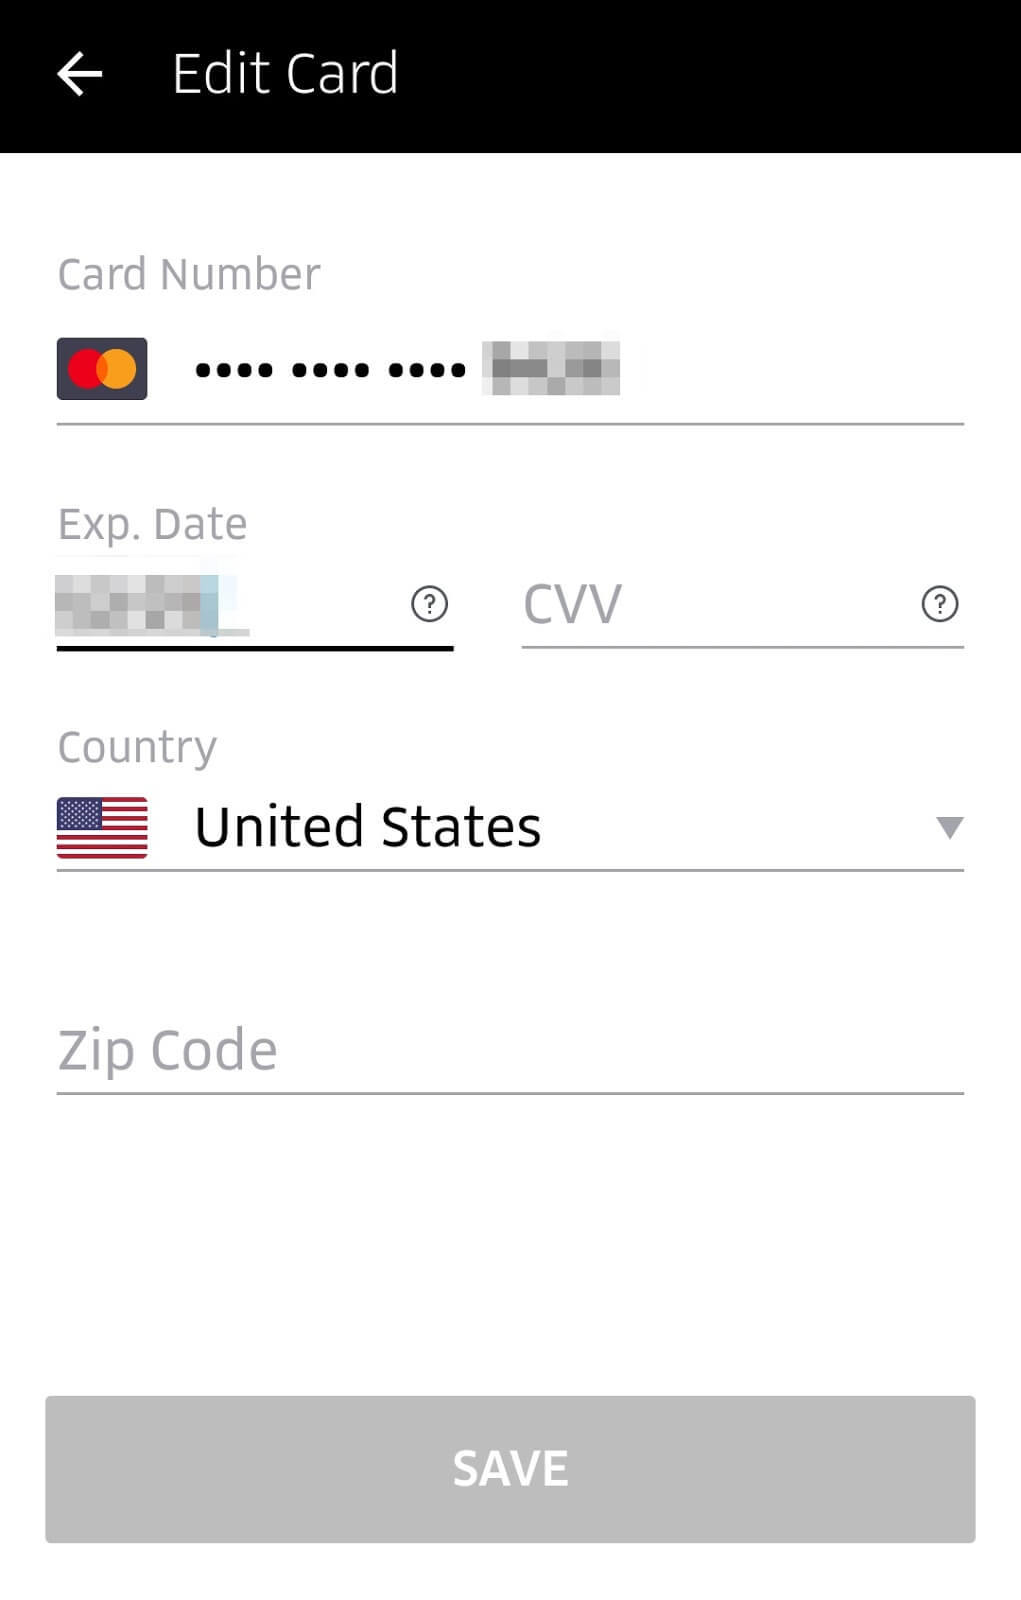 How to Remove Your Credit Card from Uber: options to edit payment information